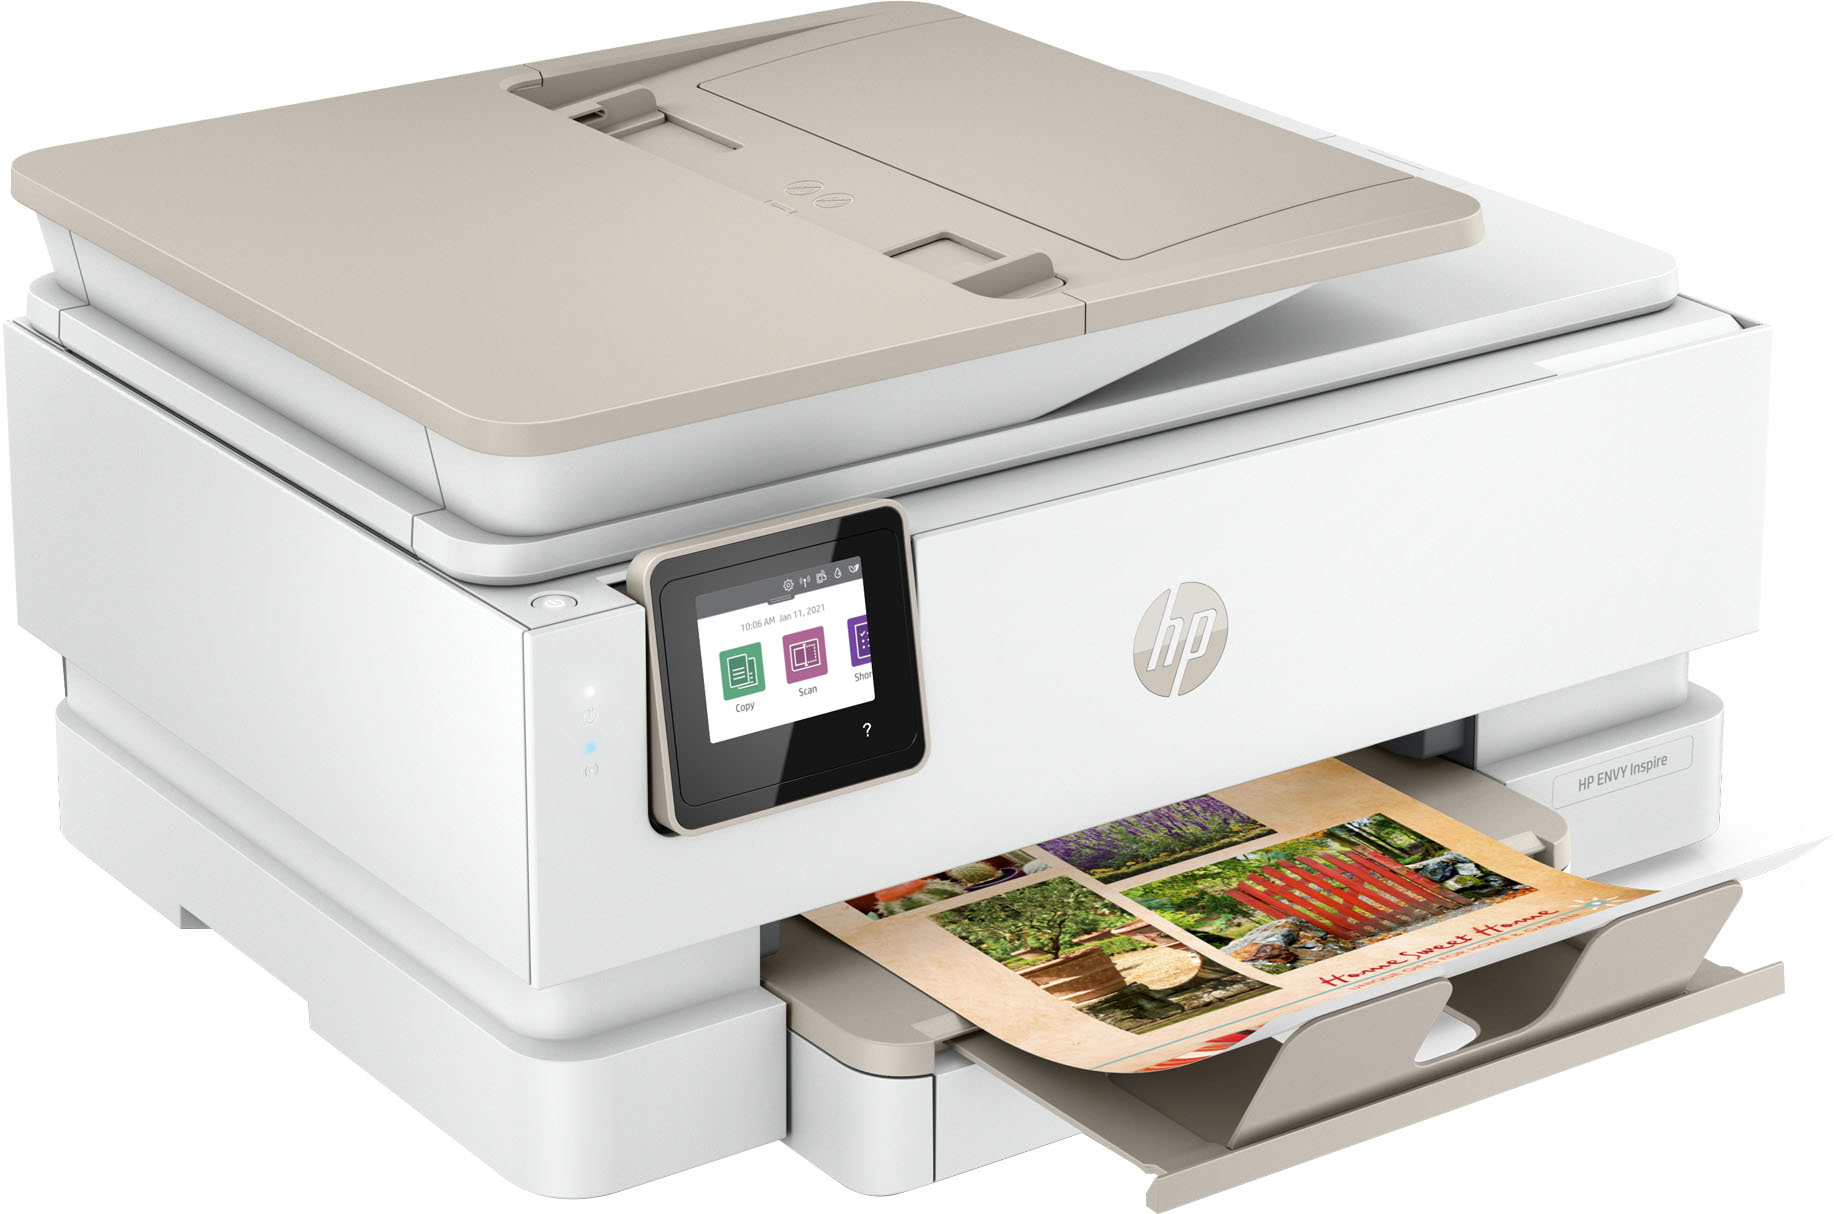 Angle View: HP - ENVY Inspire 7955e Wireless All-In-One Inkjet Photo Printer with 3 months of Instant Ink included with HP+ - White & Sandstone